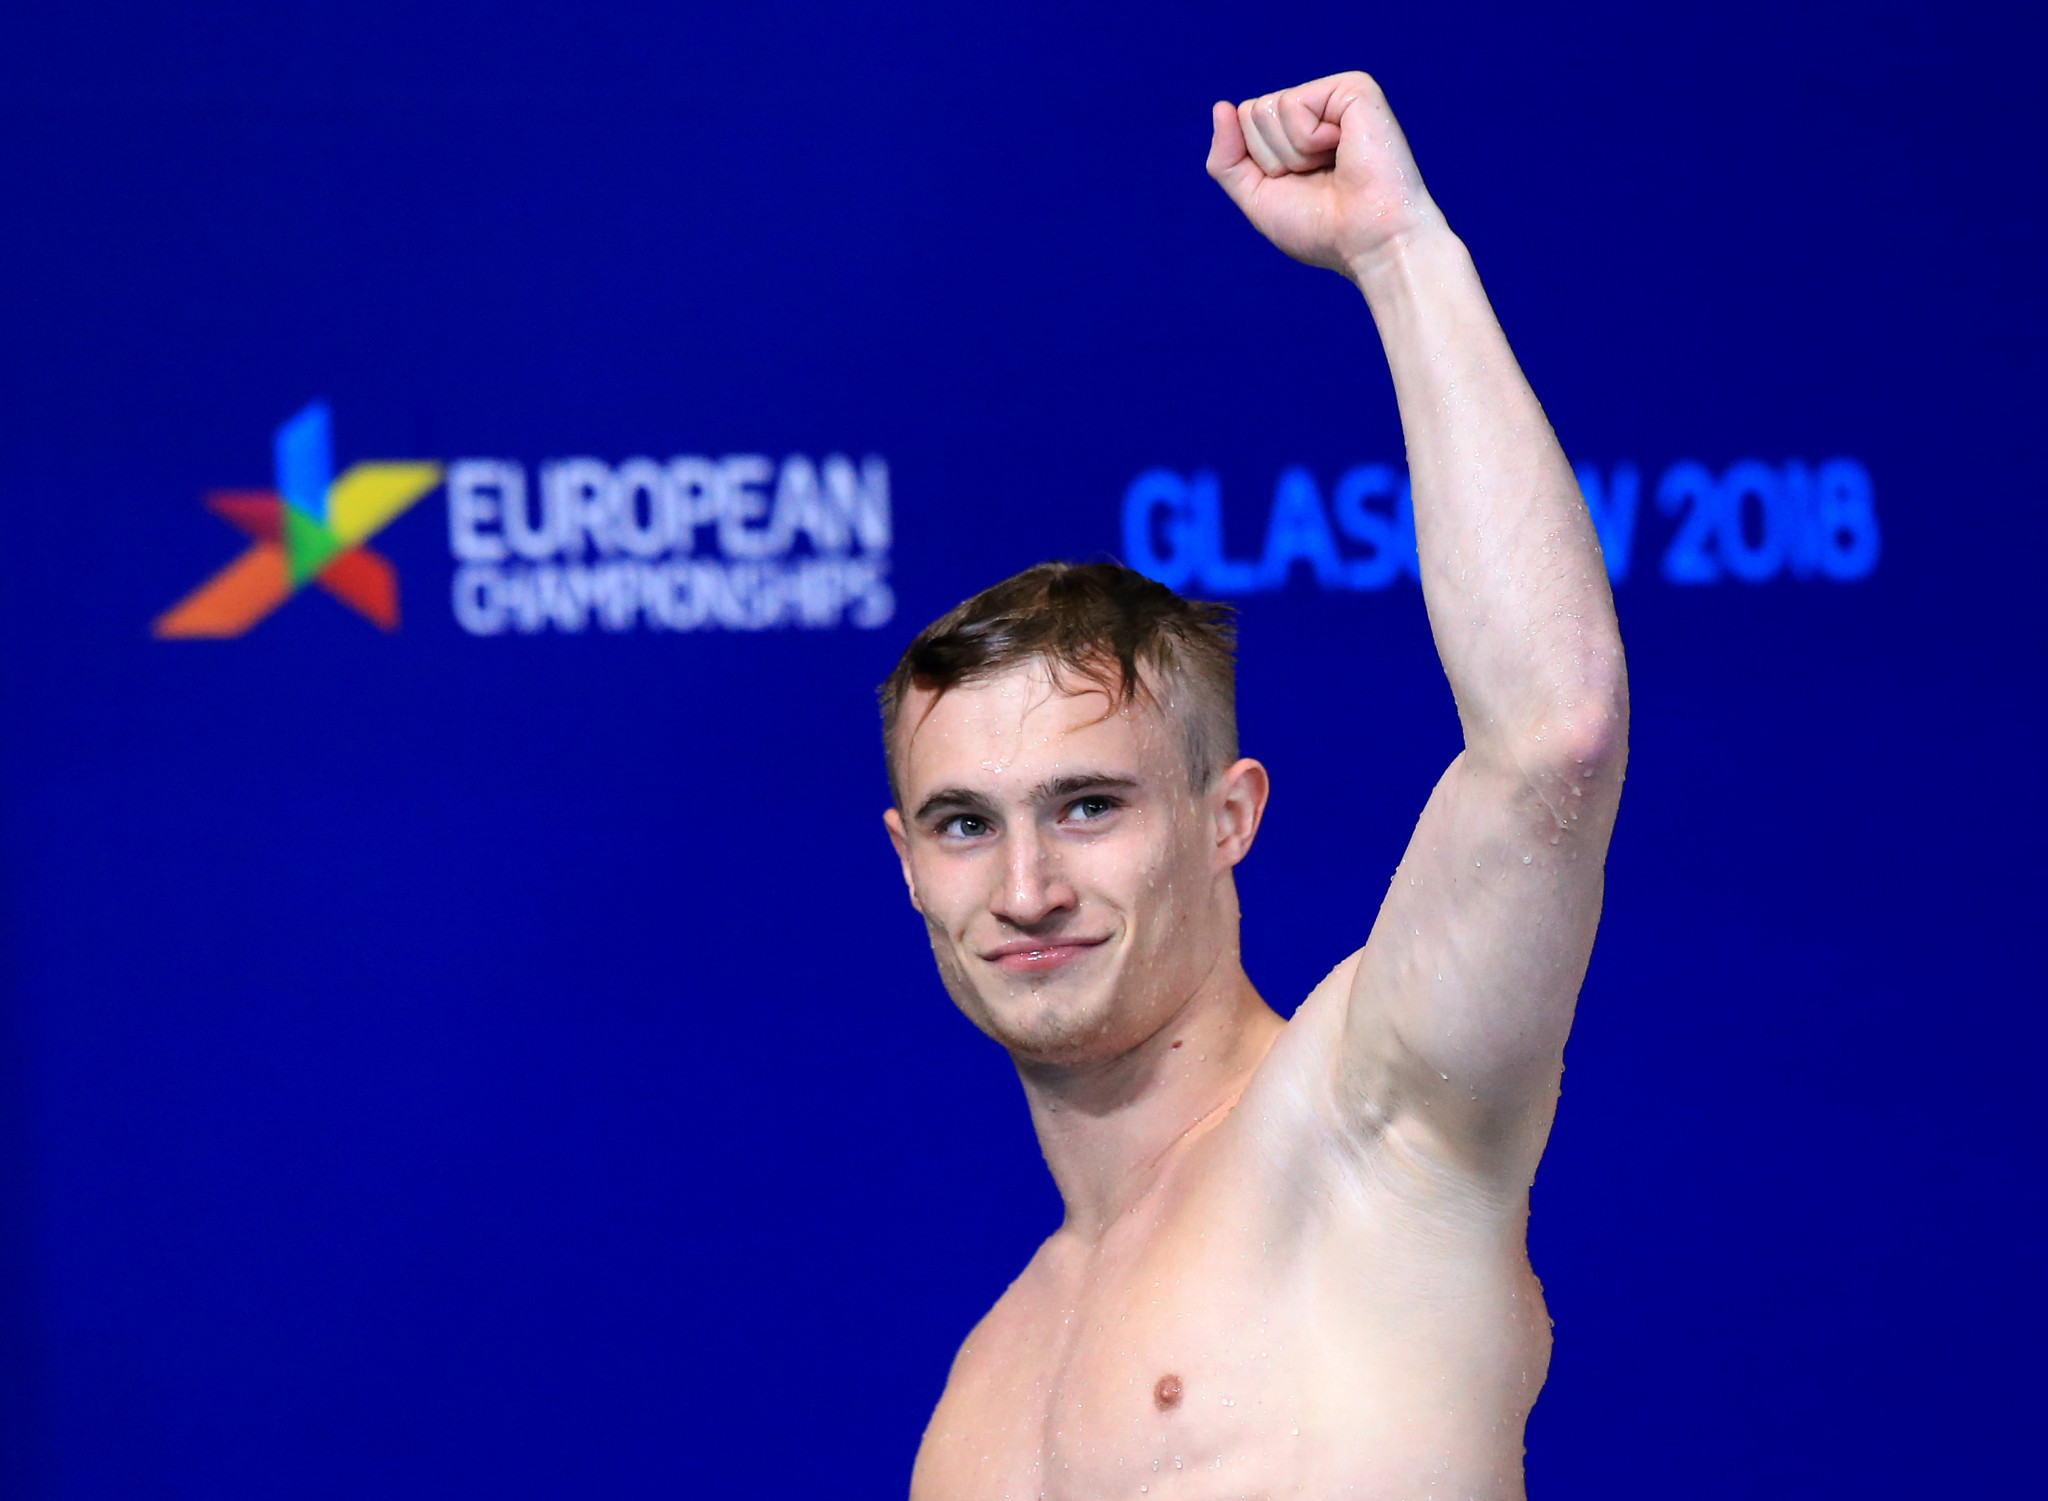 The Olympic champion in the synchronised 3m springboard event Jack Laugher then won gold in the second diving final of the day, the 1m springboard final, with a score of 414.60 ©Getty Images